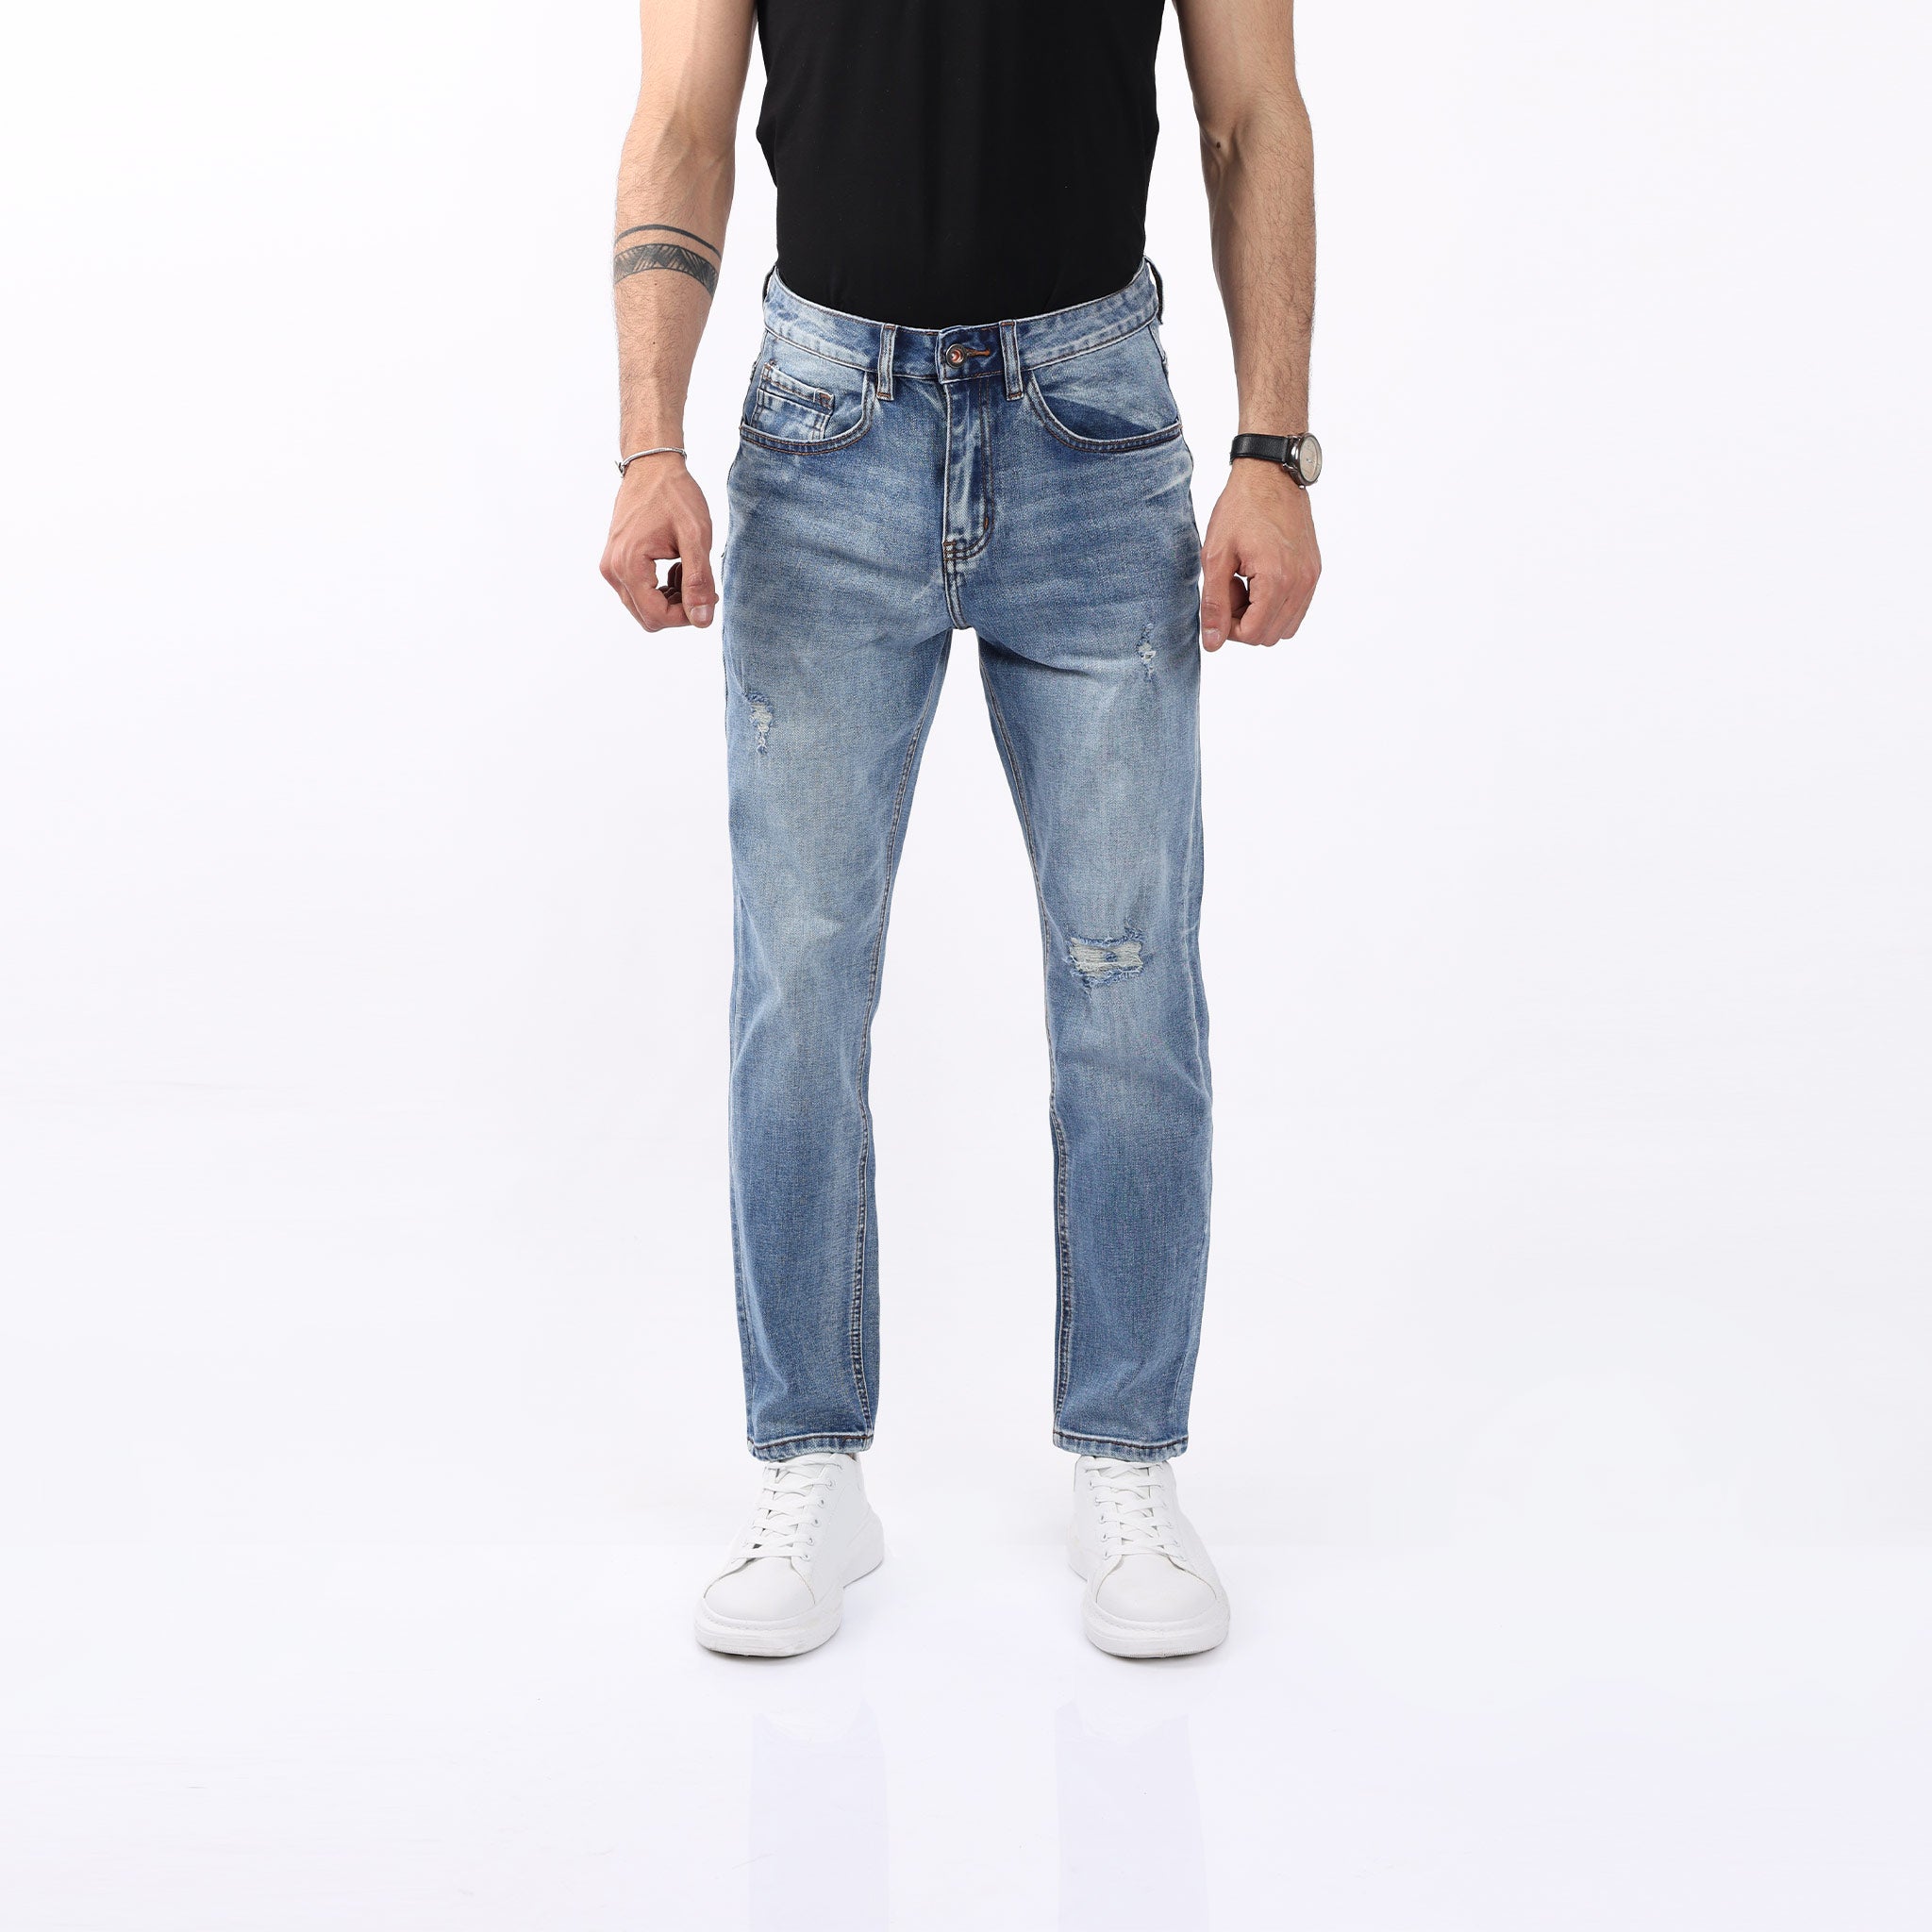 Ripped Slim Fit Jeans Pants